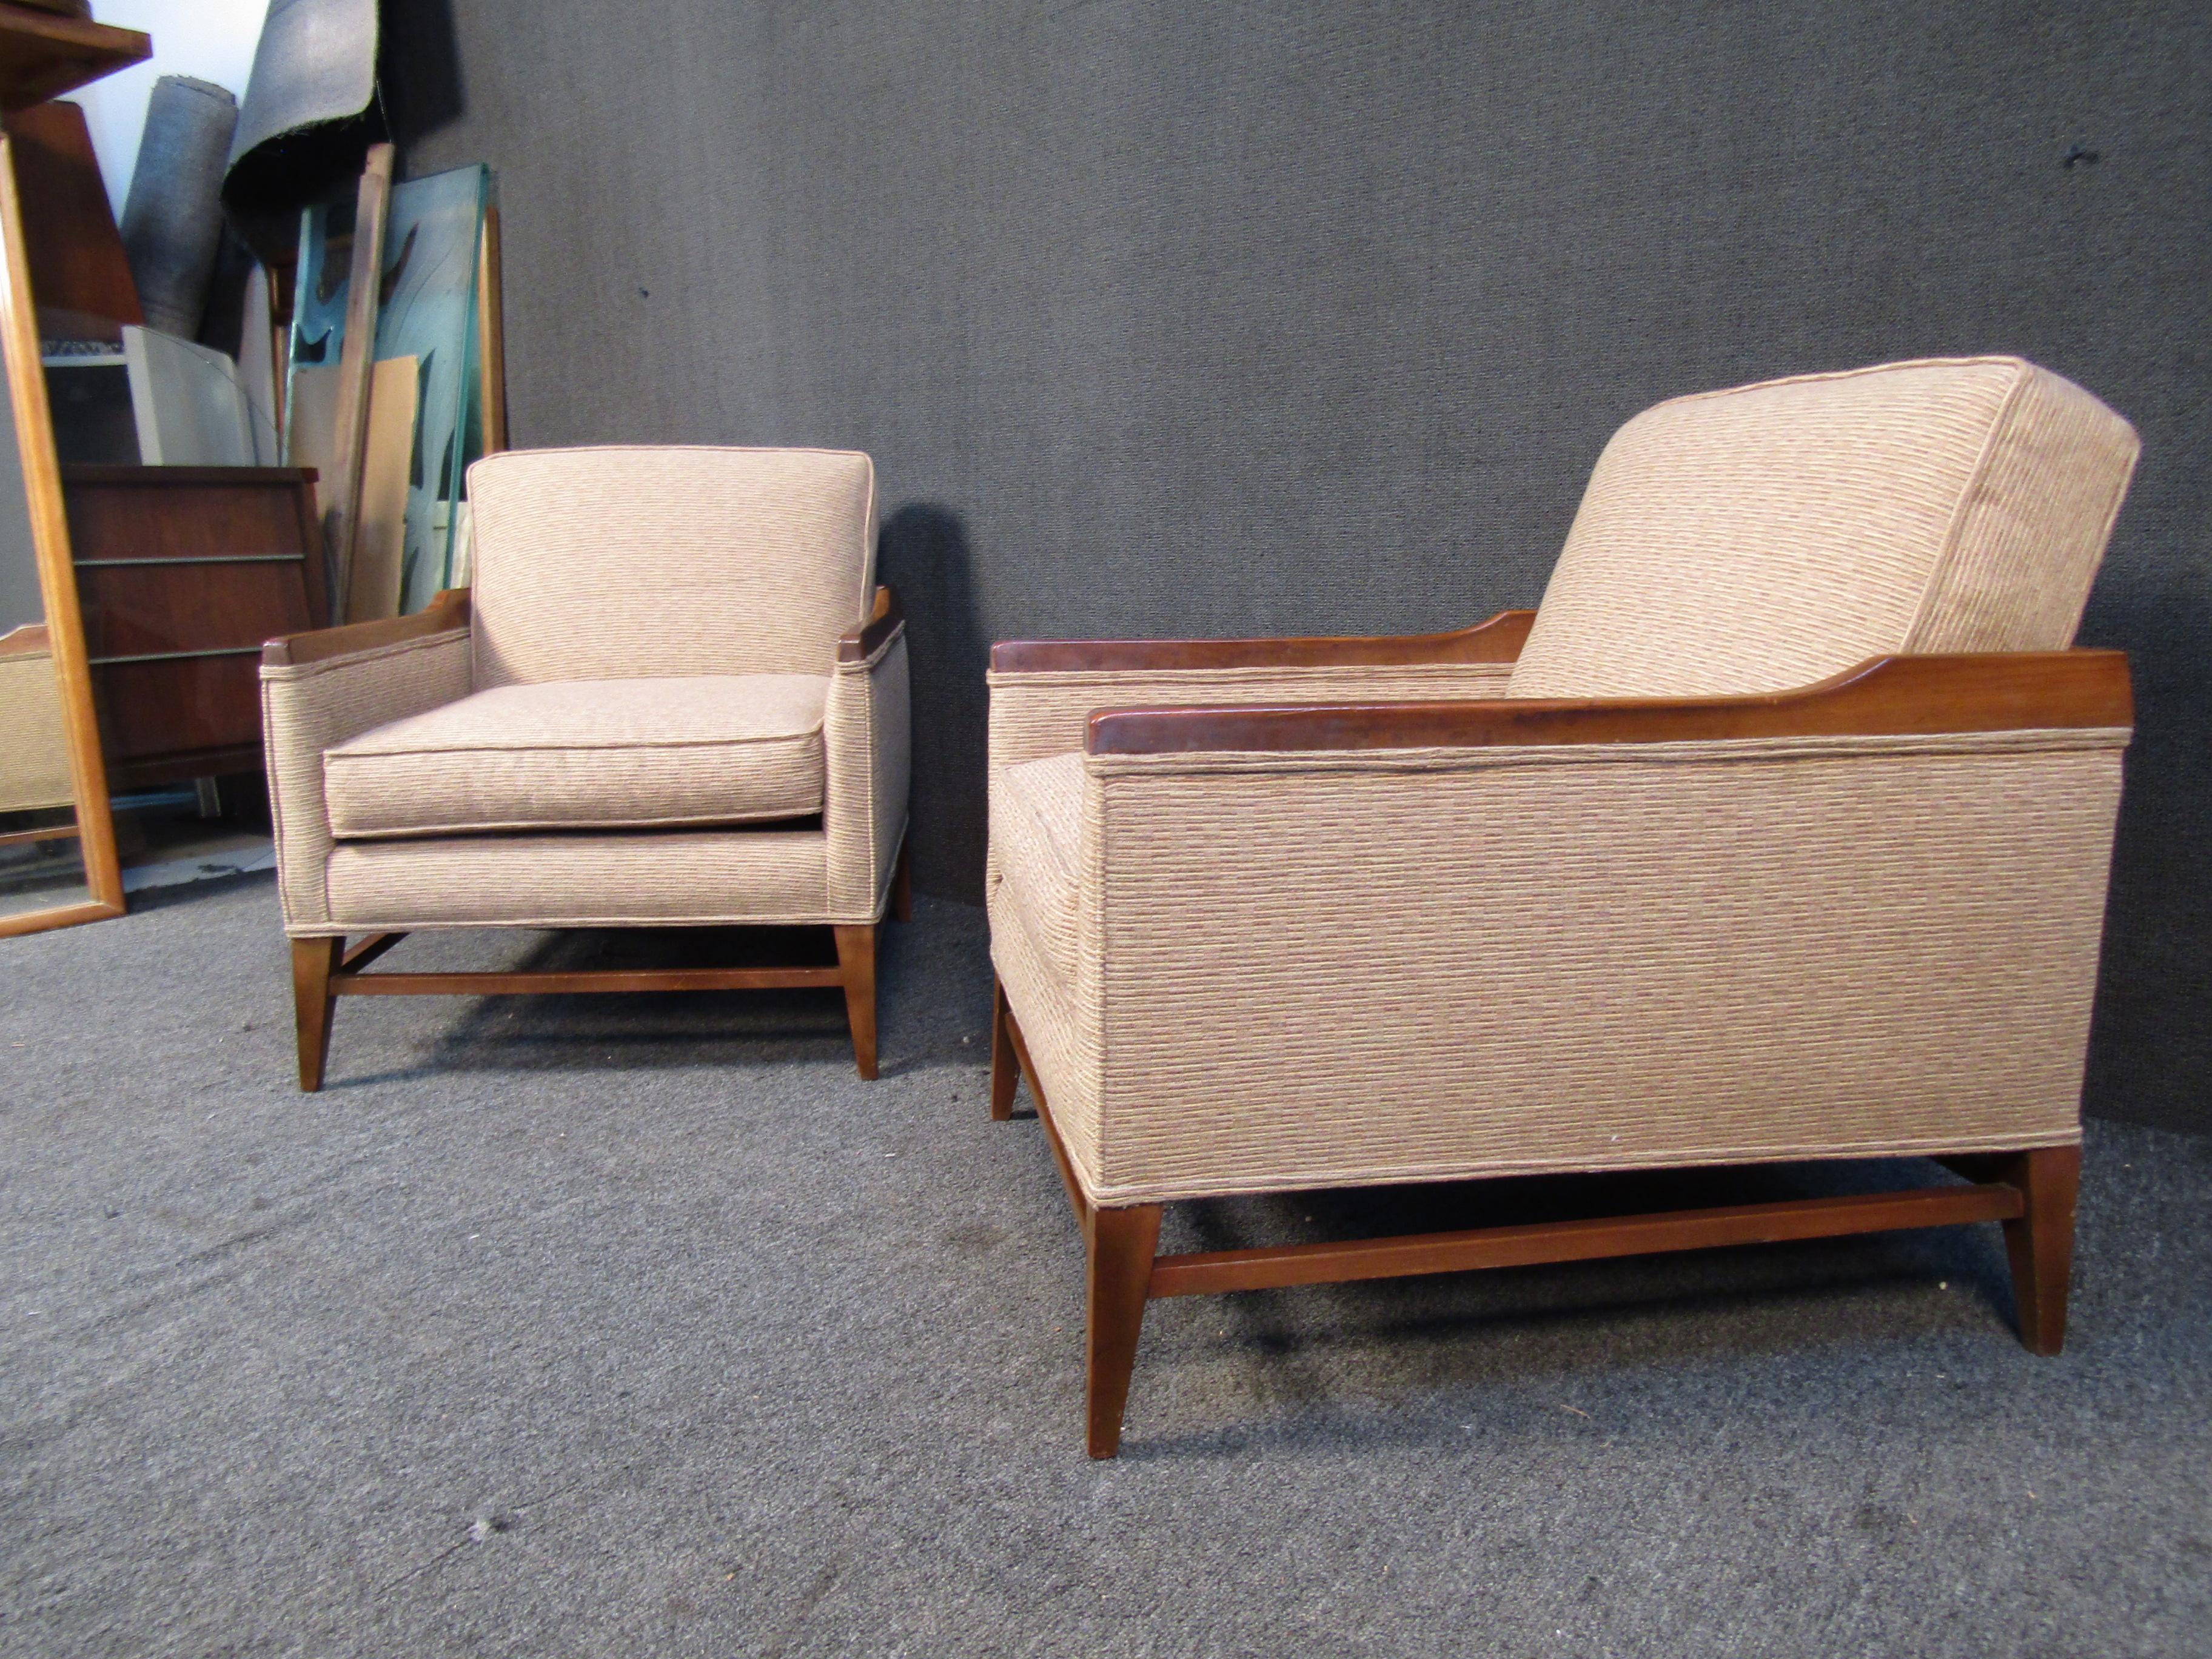 Pairing a warm beige upholstery with walnut frames, this vintage pair of lounge chairs are a versatile way to add Mid-Century Modern style to any home, office, or lobby. Their understated design are inspired by the style of Paul McCobb. Please